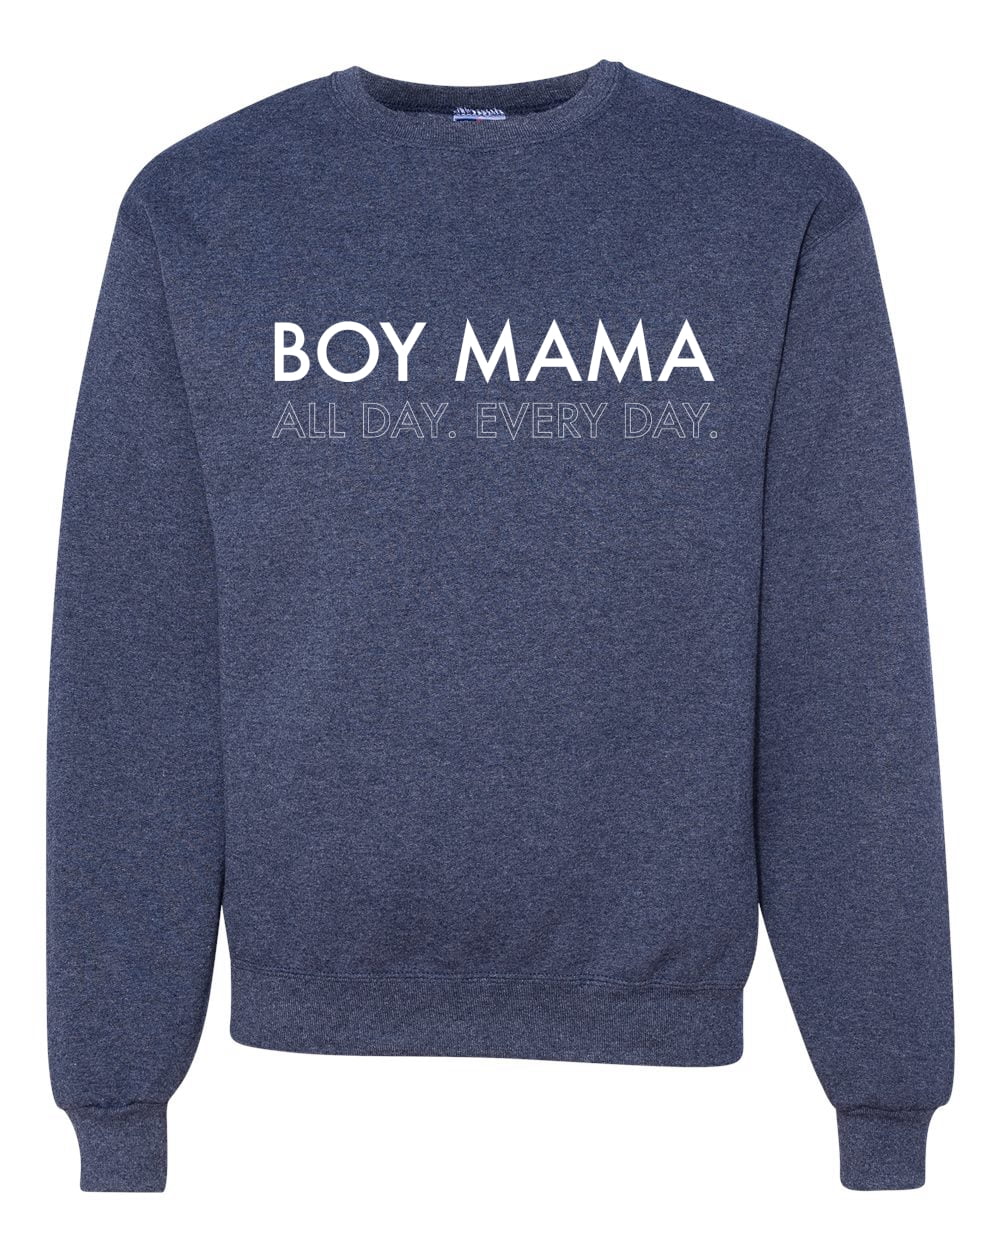 Mother's Day Shirt for new mom Boy Mama Sweatshirt Mama Shirt Boy Mama Shirt Mom Shirt Shirt for mom Shirt for boy mom